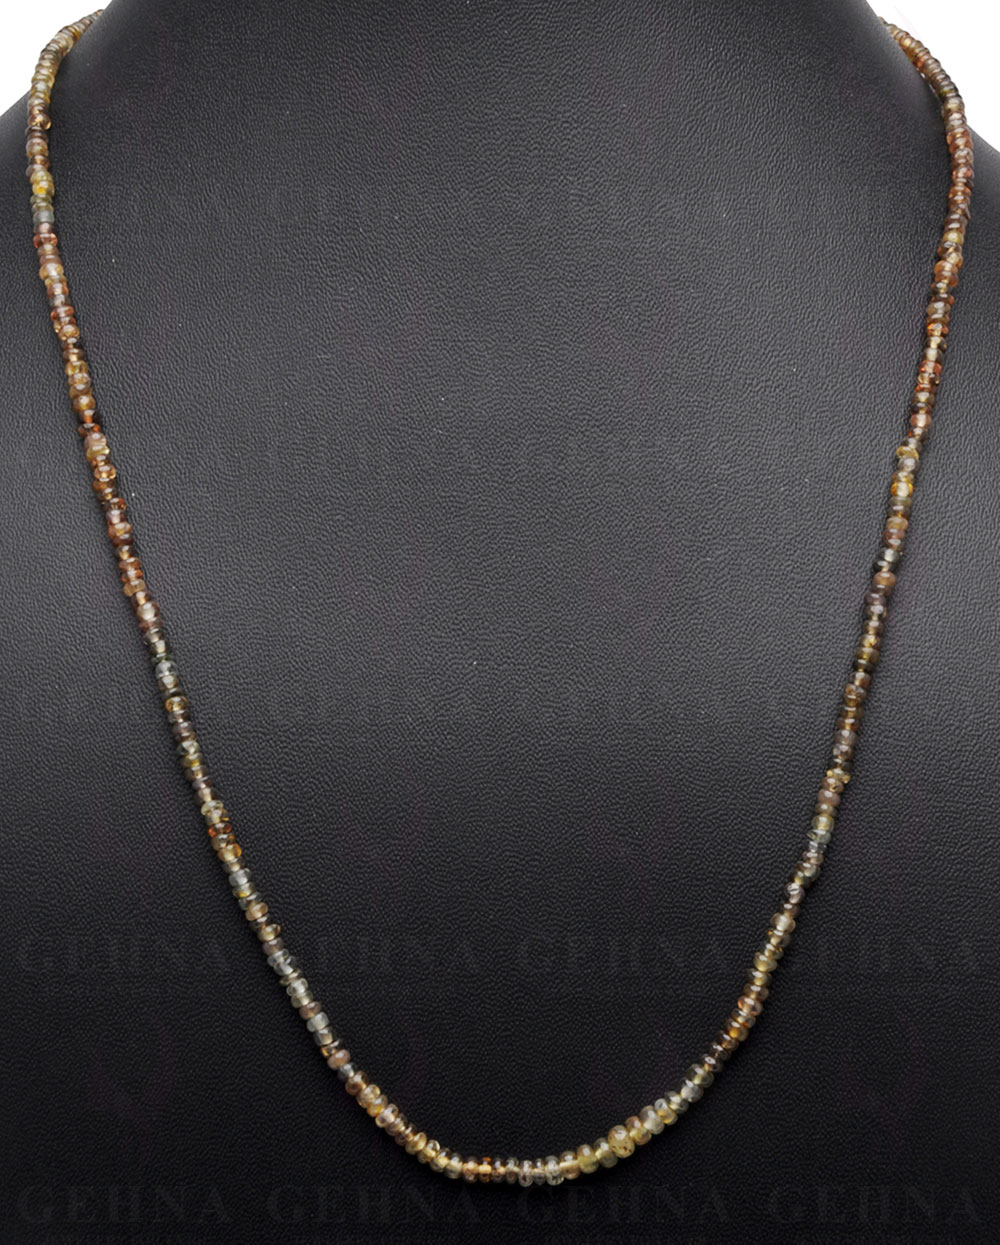 22" Inches of Spinel Gemstone Bead Necklace NS-1533